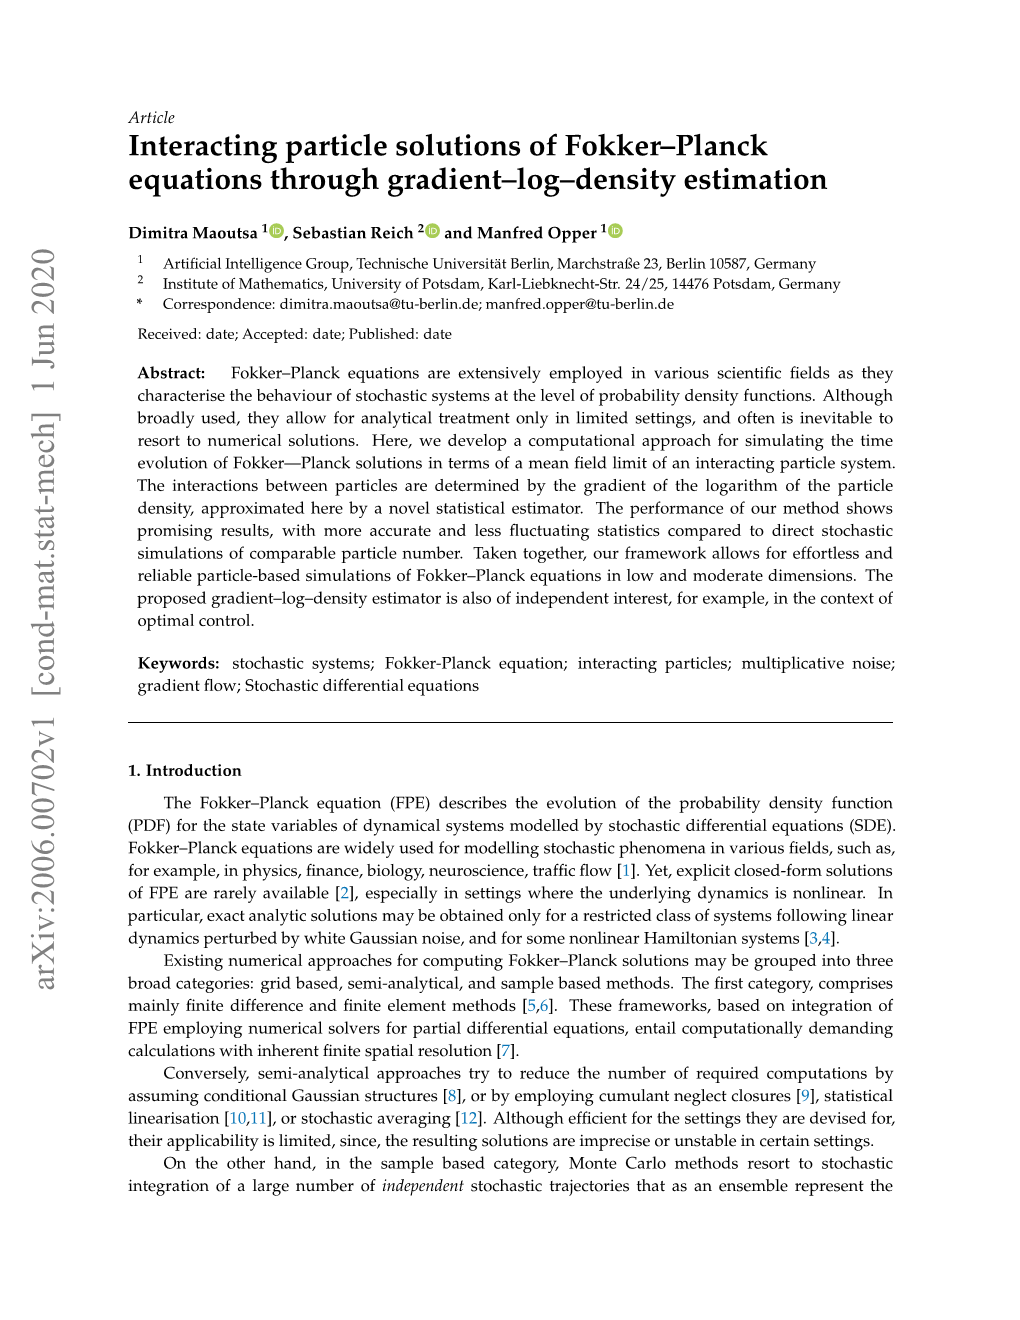 Interacting Particle Solutions of Fokker–Planck Equations Through Gradient–Log–Density Estimation